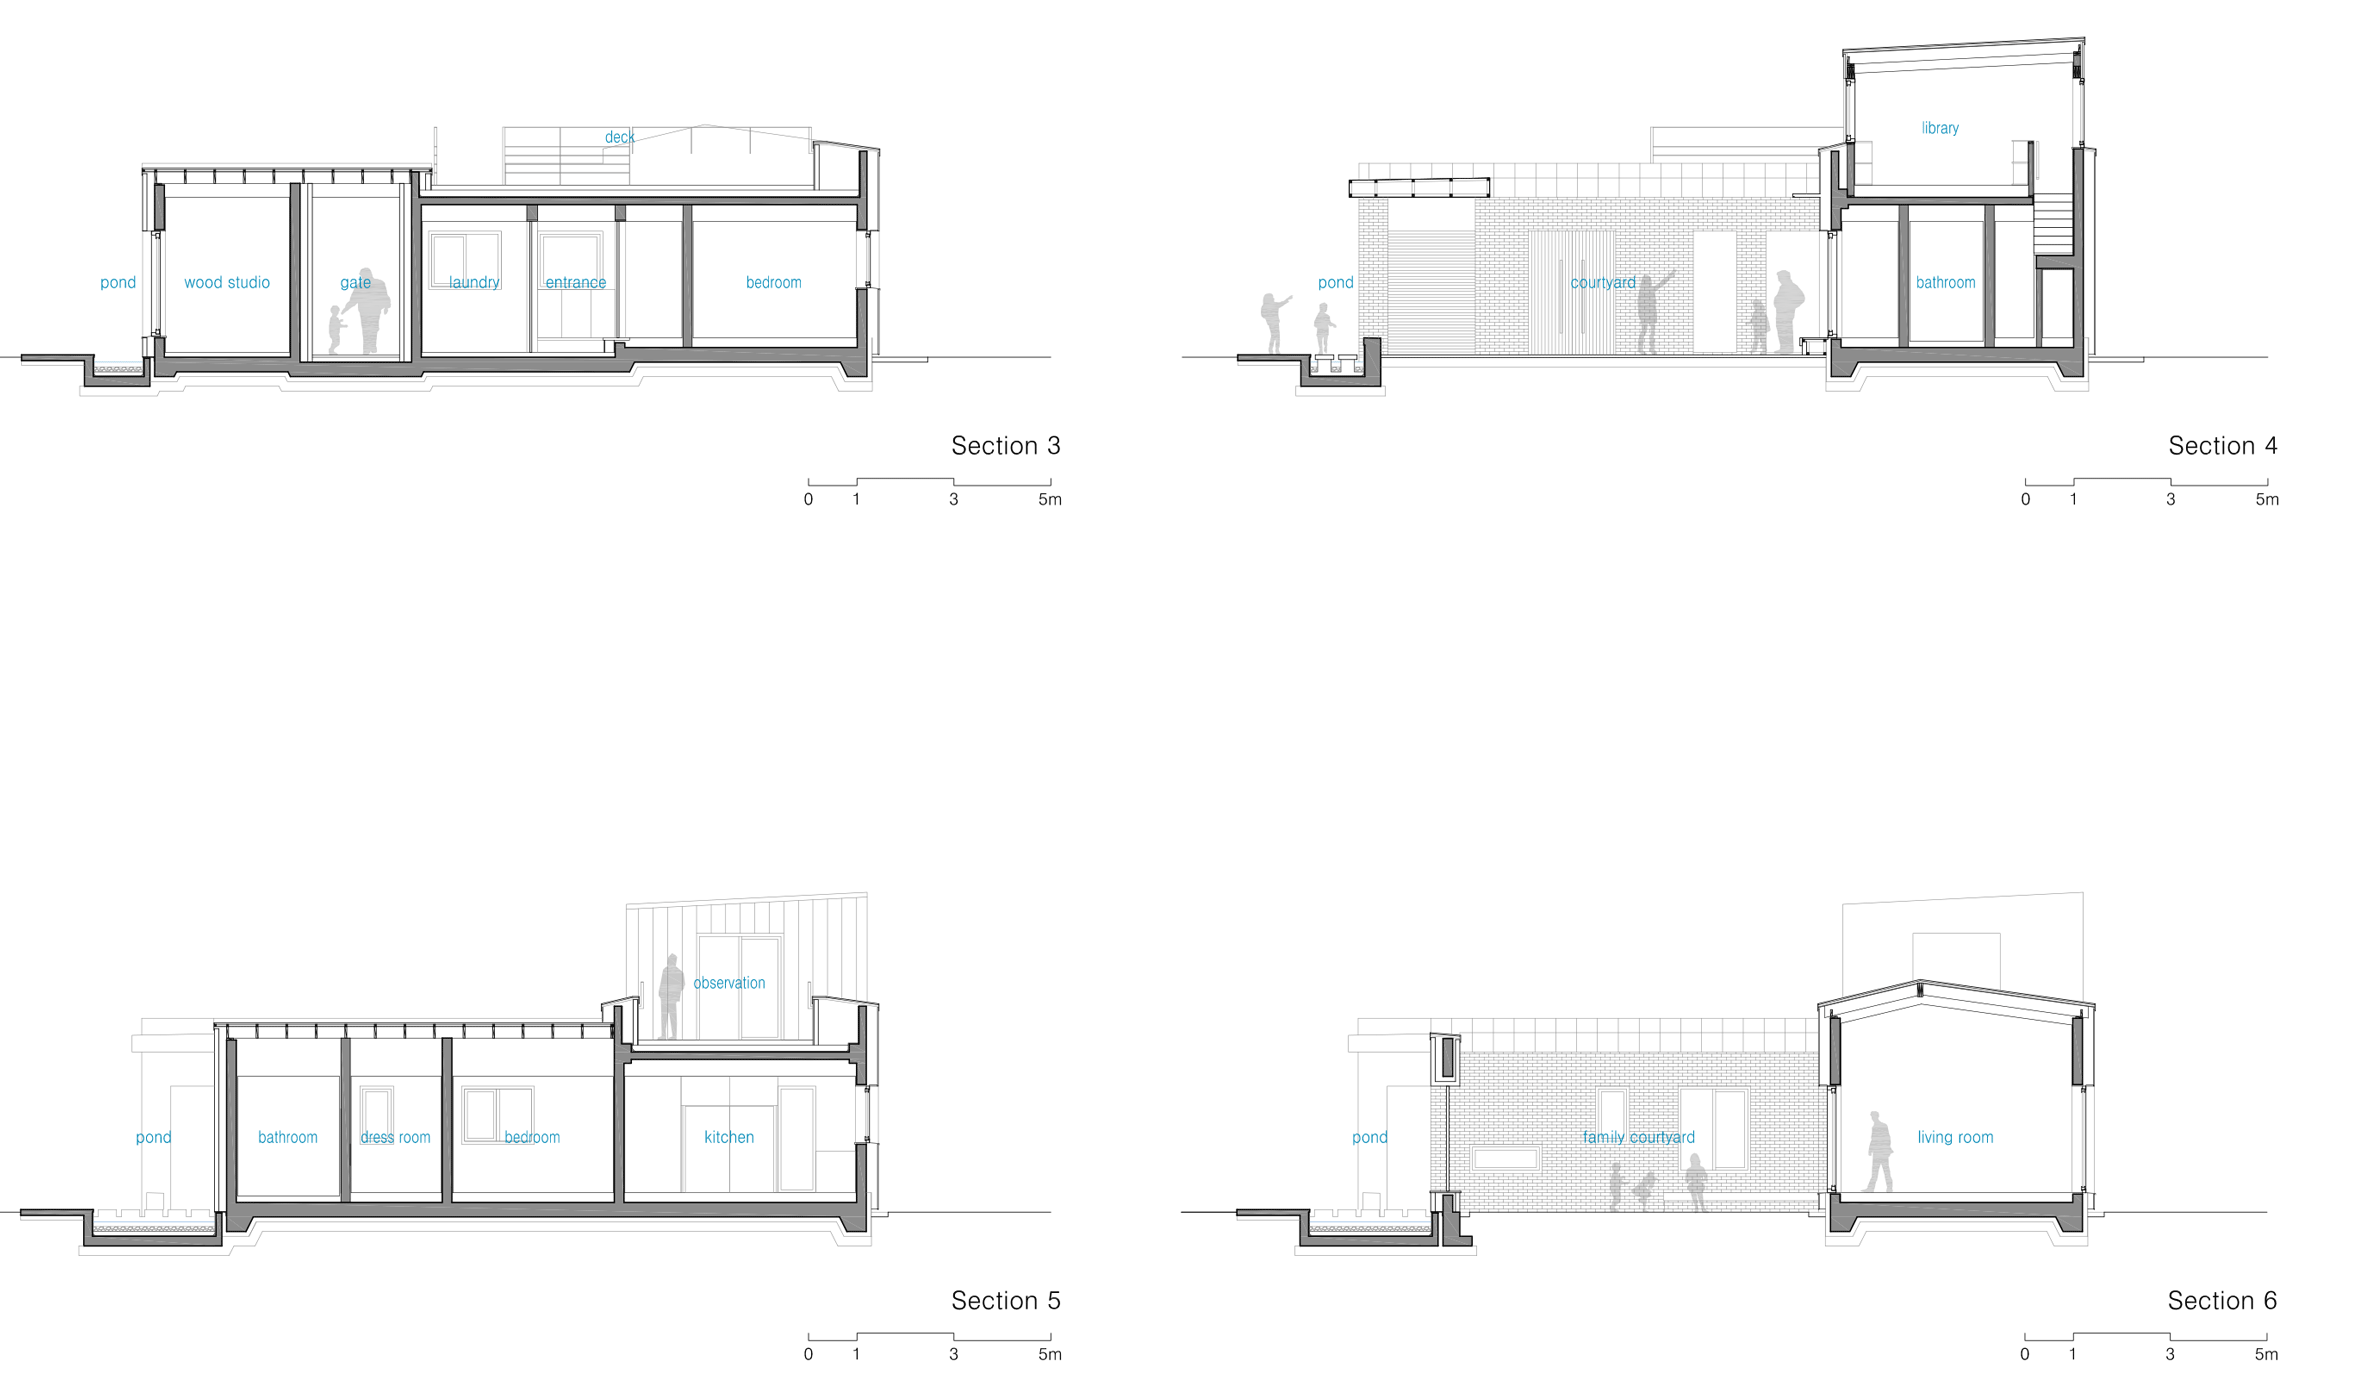 two-courtyards-house-bridge-130-cafe-lee-haan-architects-south-korea-residential-architecture_dezeen_plan-sectionb_1_1